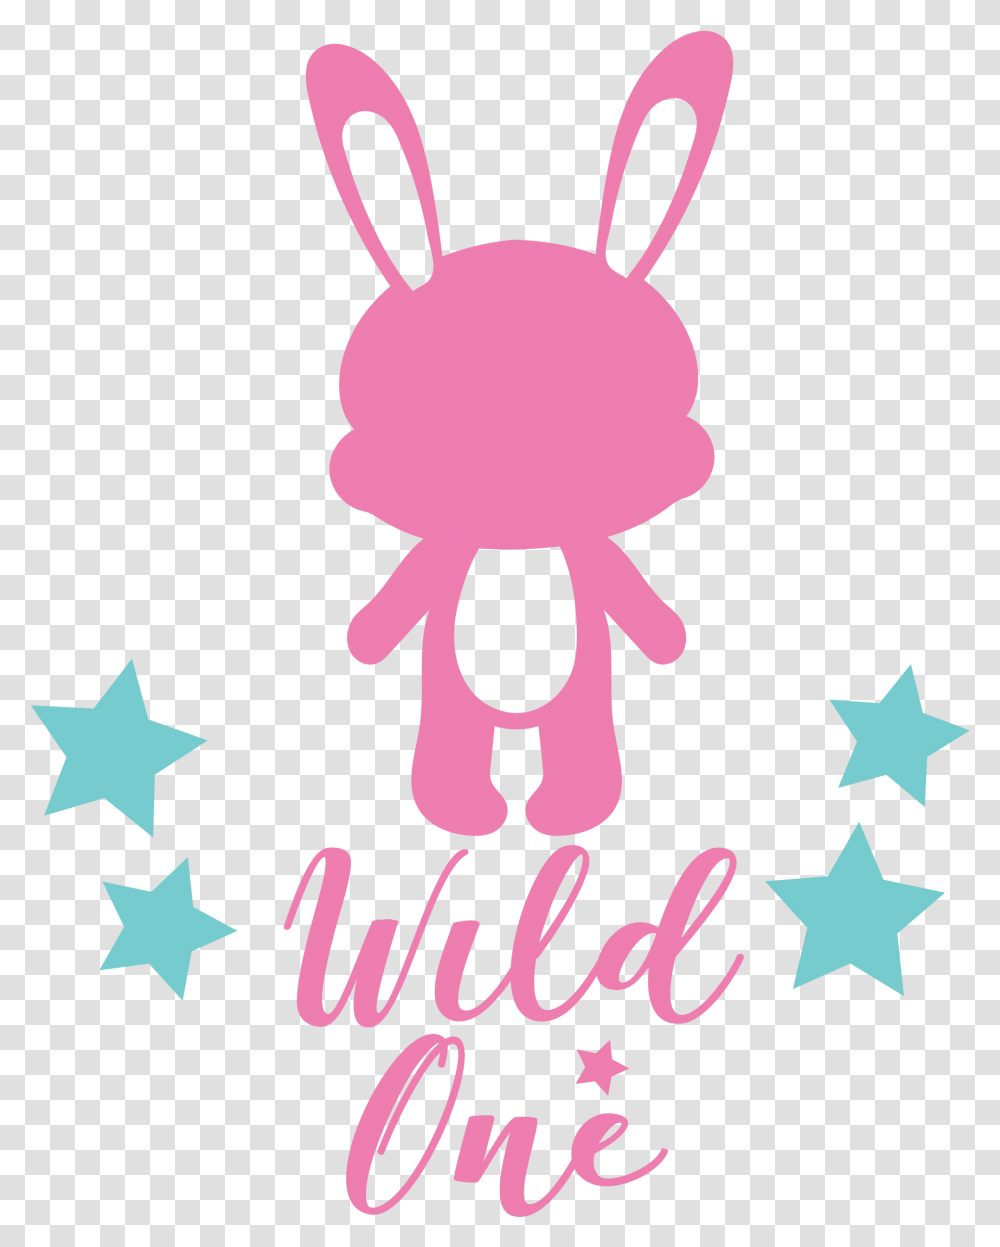 Wild One Bunny Cutting Files Svg Dxf Pdf Eps Included Stars And Moon Stencil, Star Symbol, Animal, Poster Transparent Png